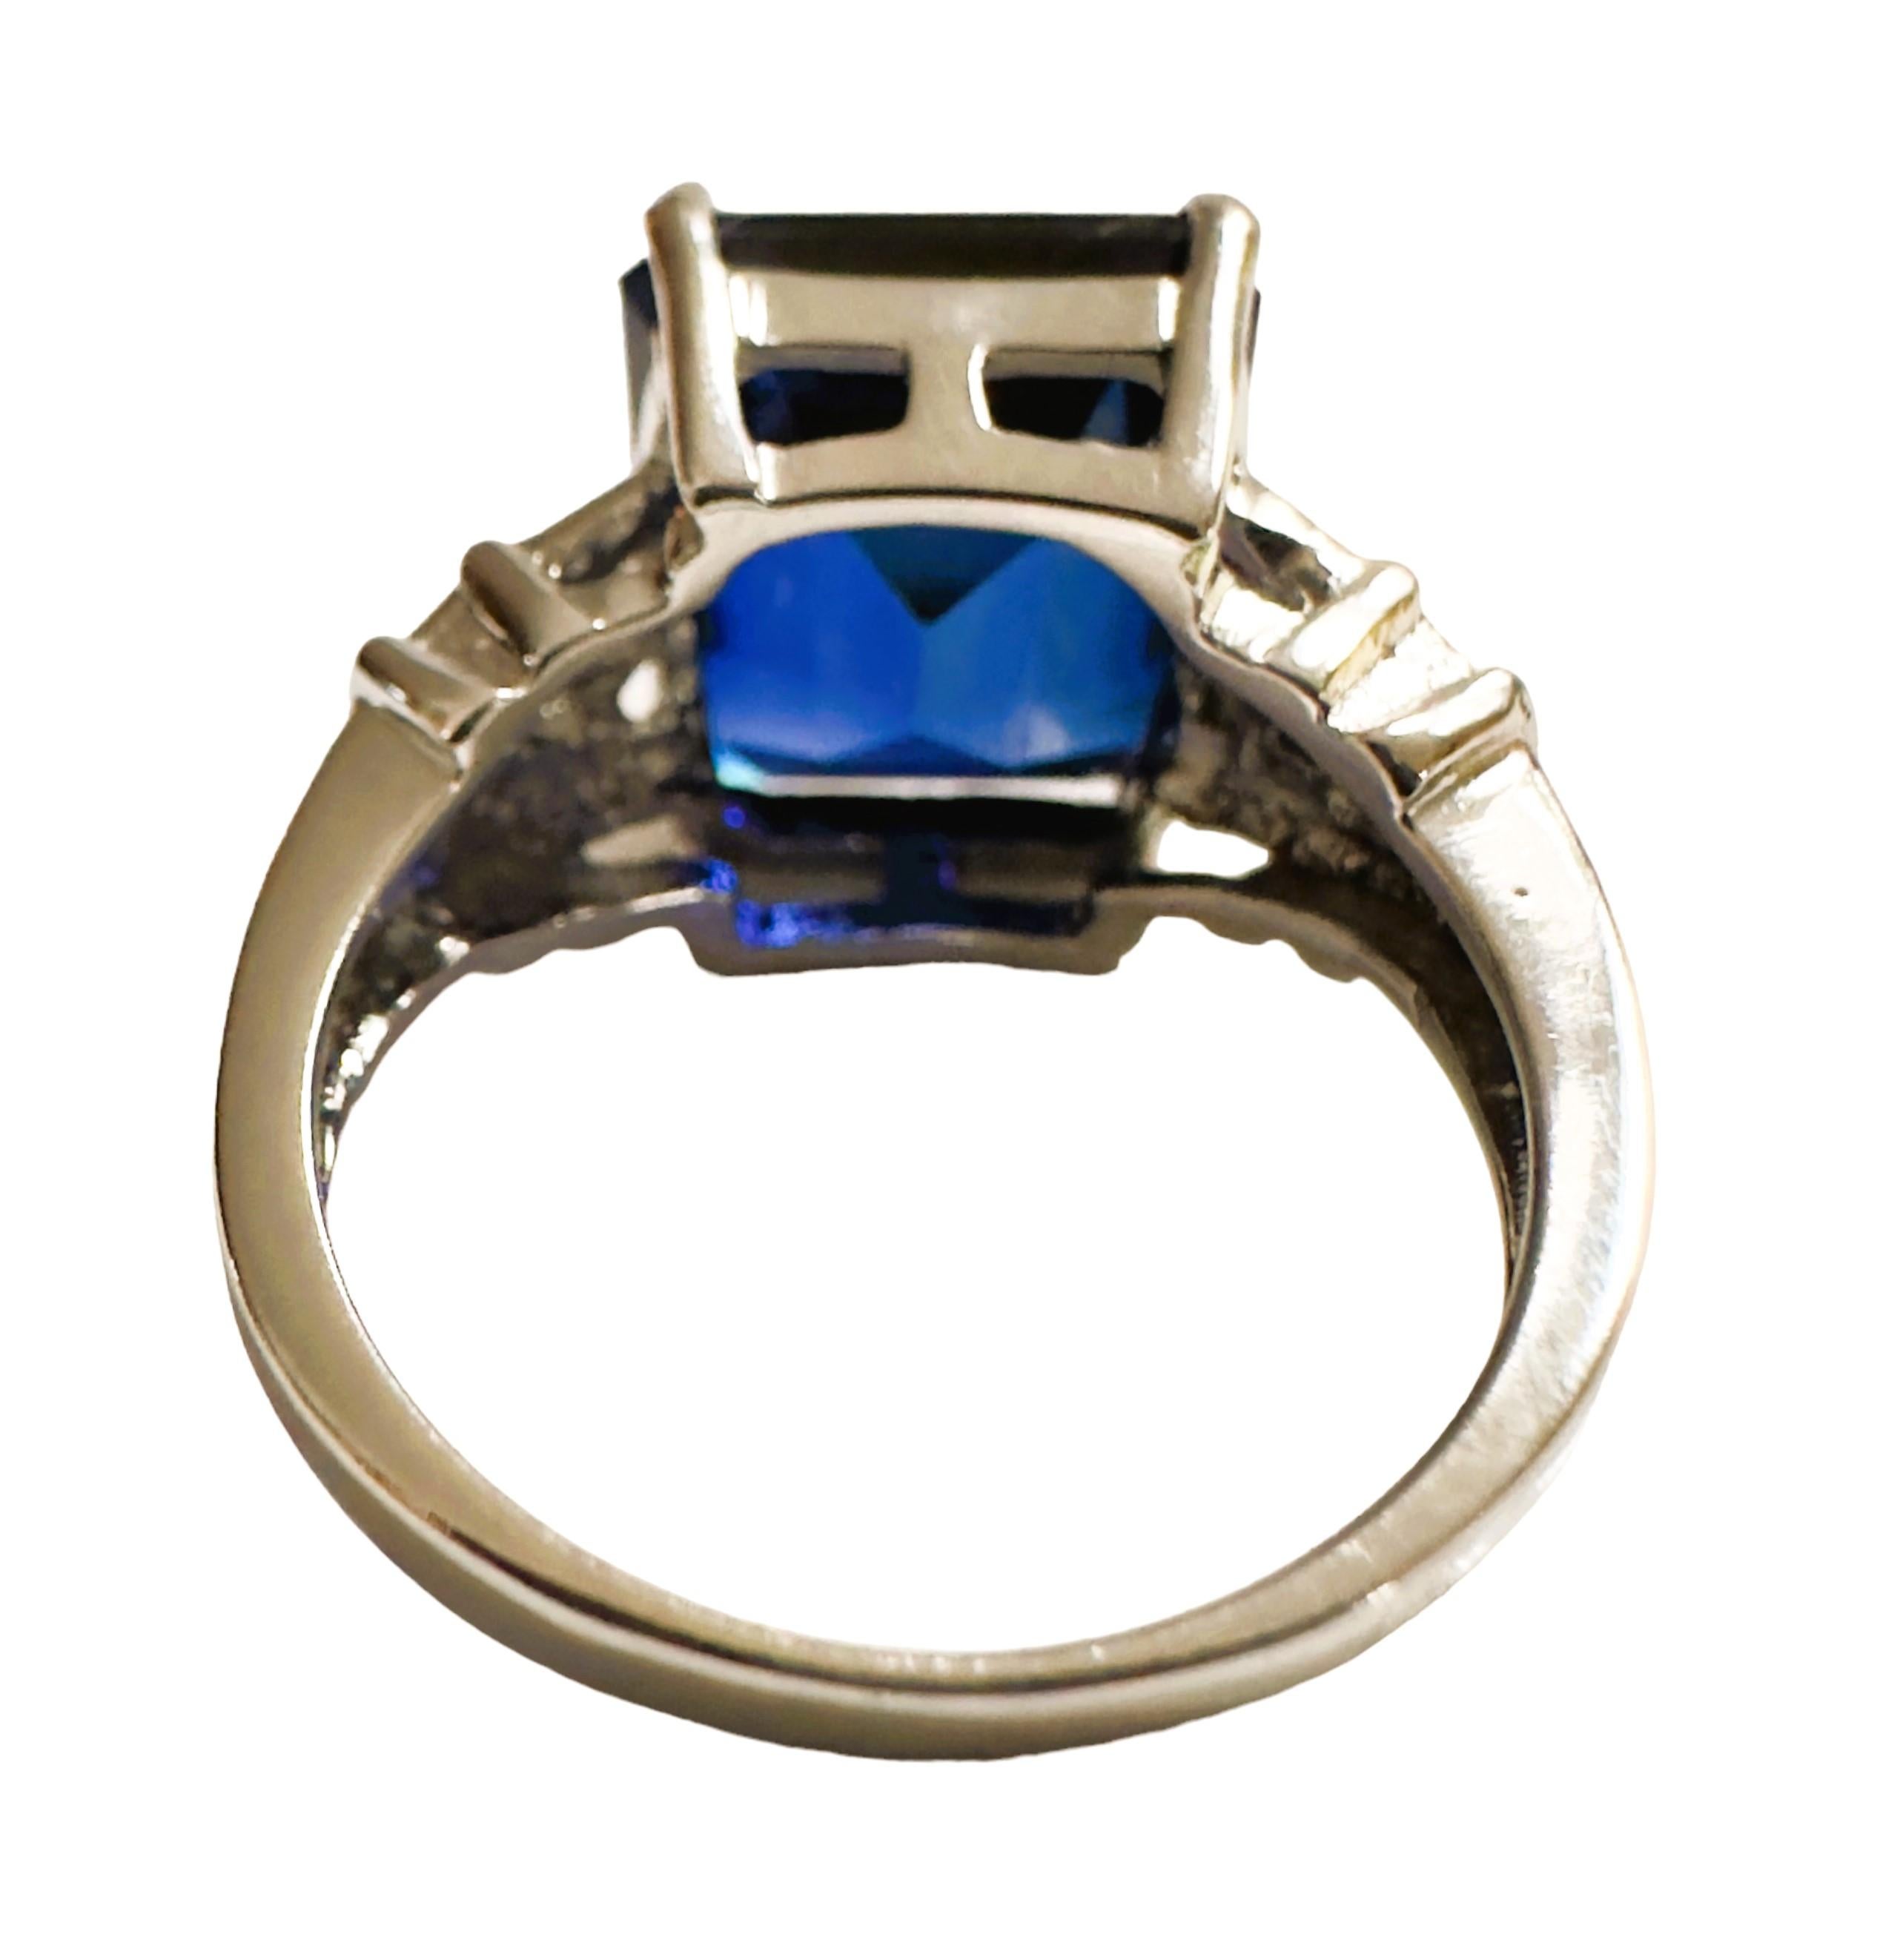 Princess Cut New African IF 10.20 Ct Deep Blue Sapphire Sterling Ring Size 6.25